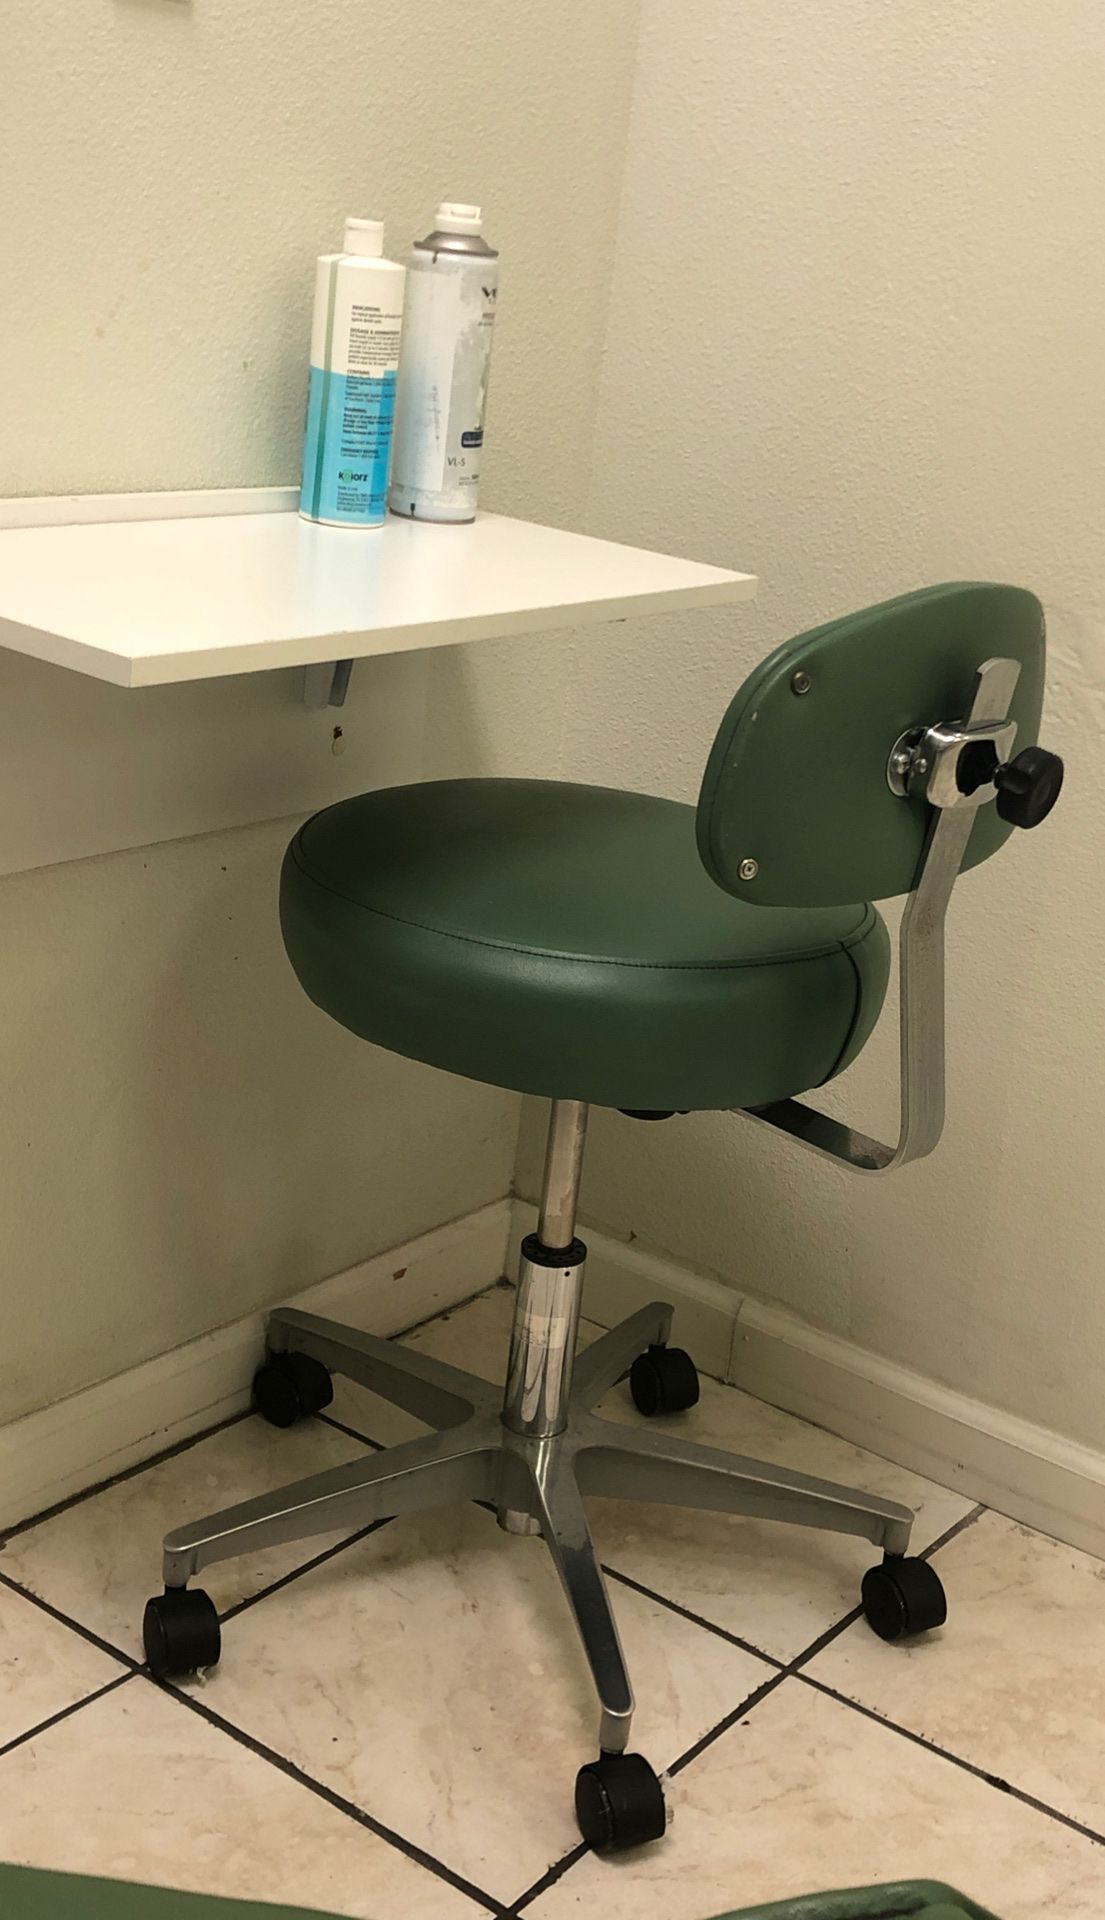 Doctors chair good condition good wheels the lowest